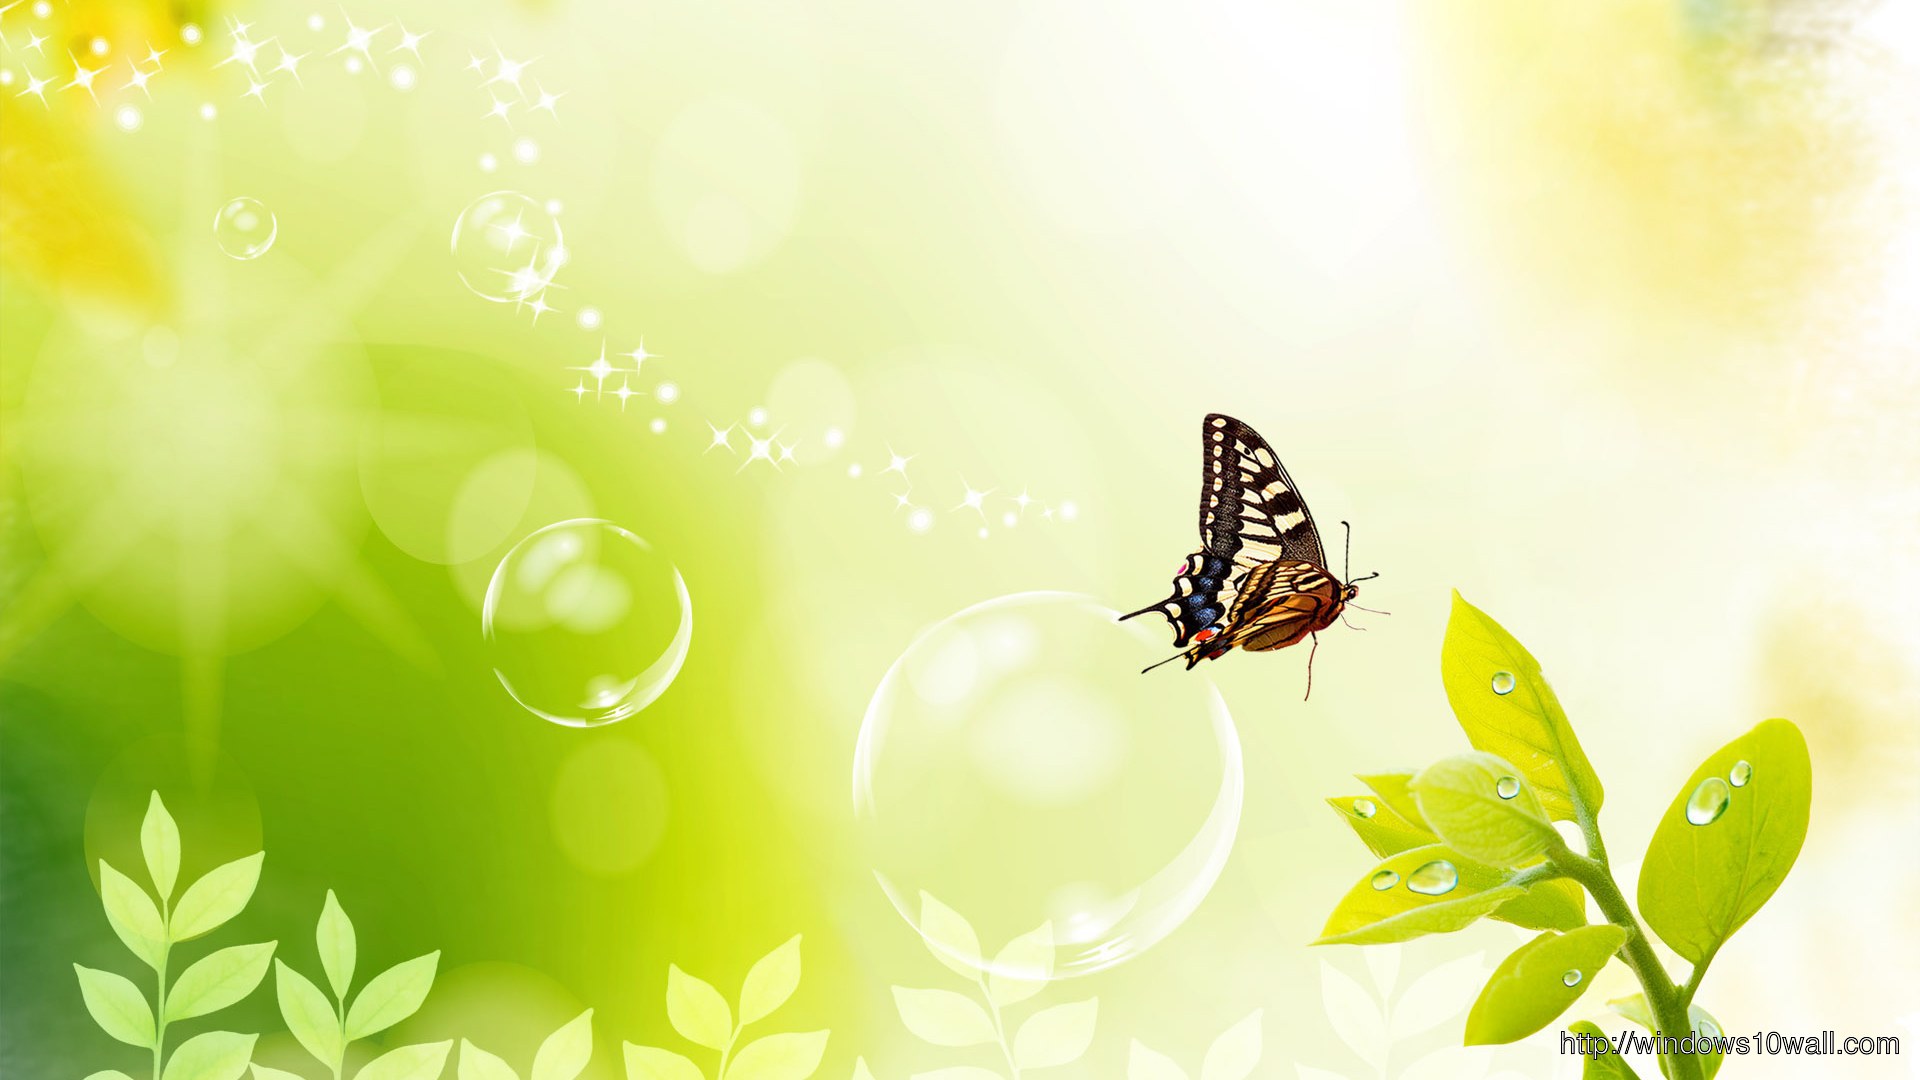 Widescreen Landscape Nature Wallpaper with Butterfly